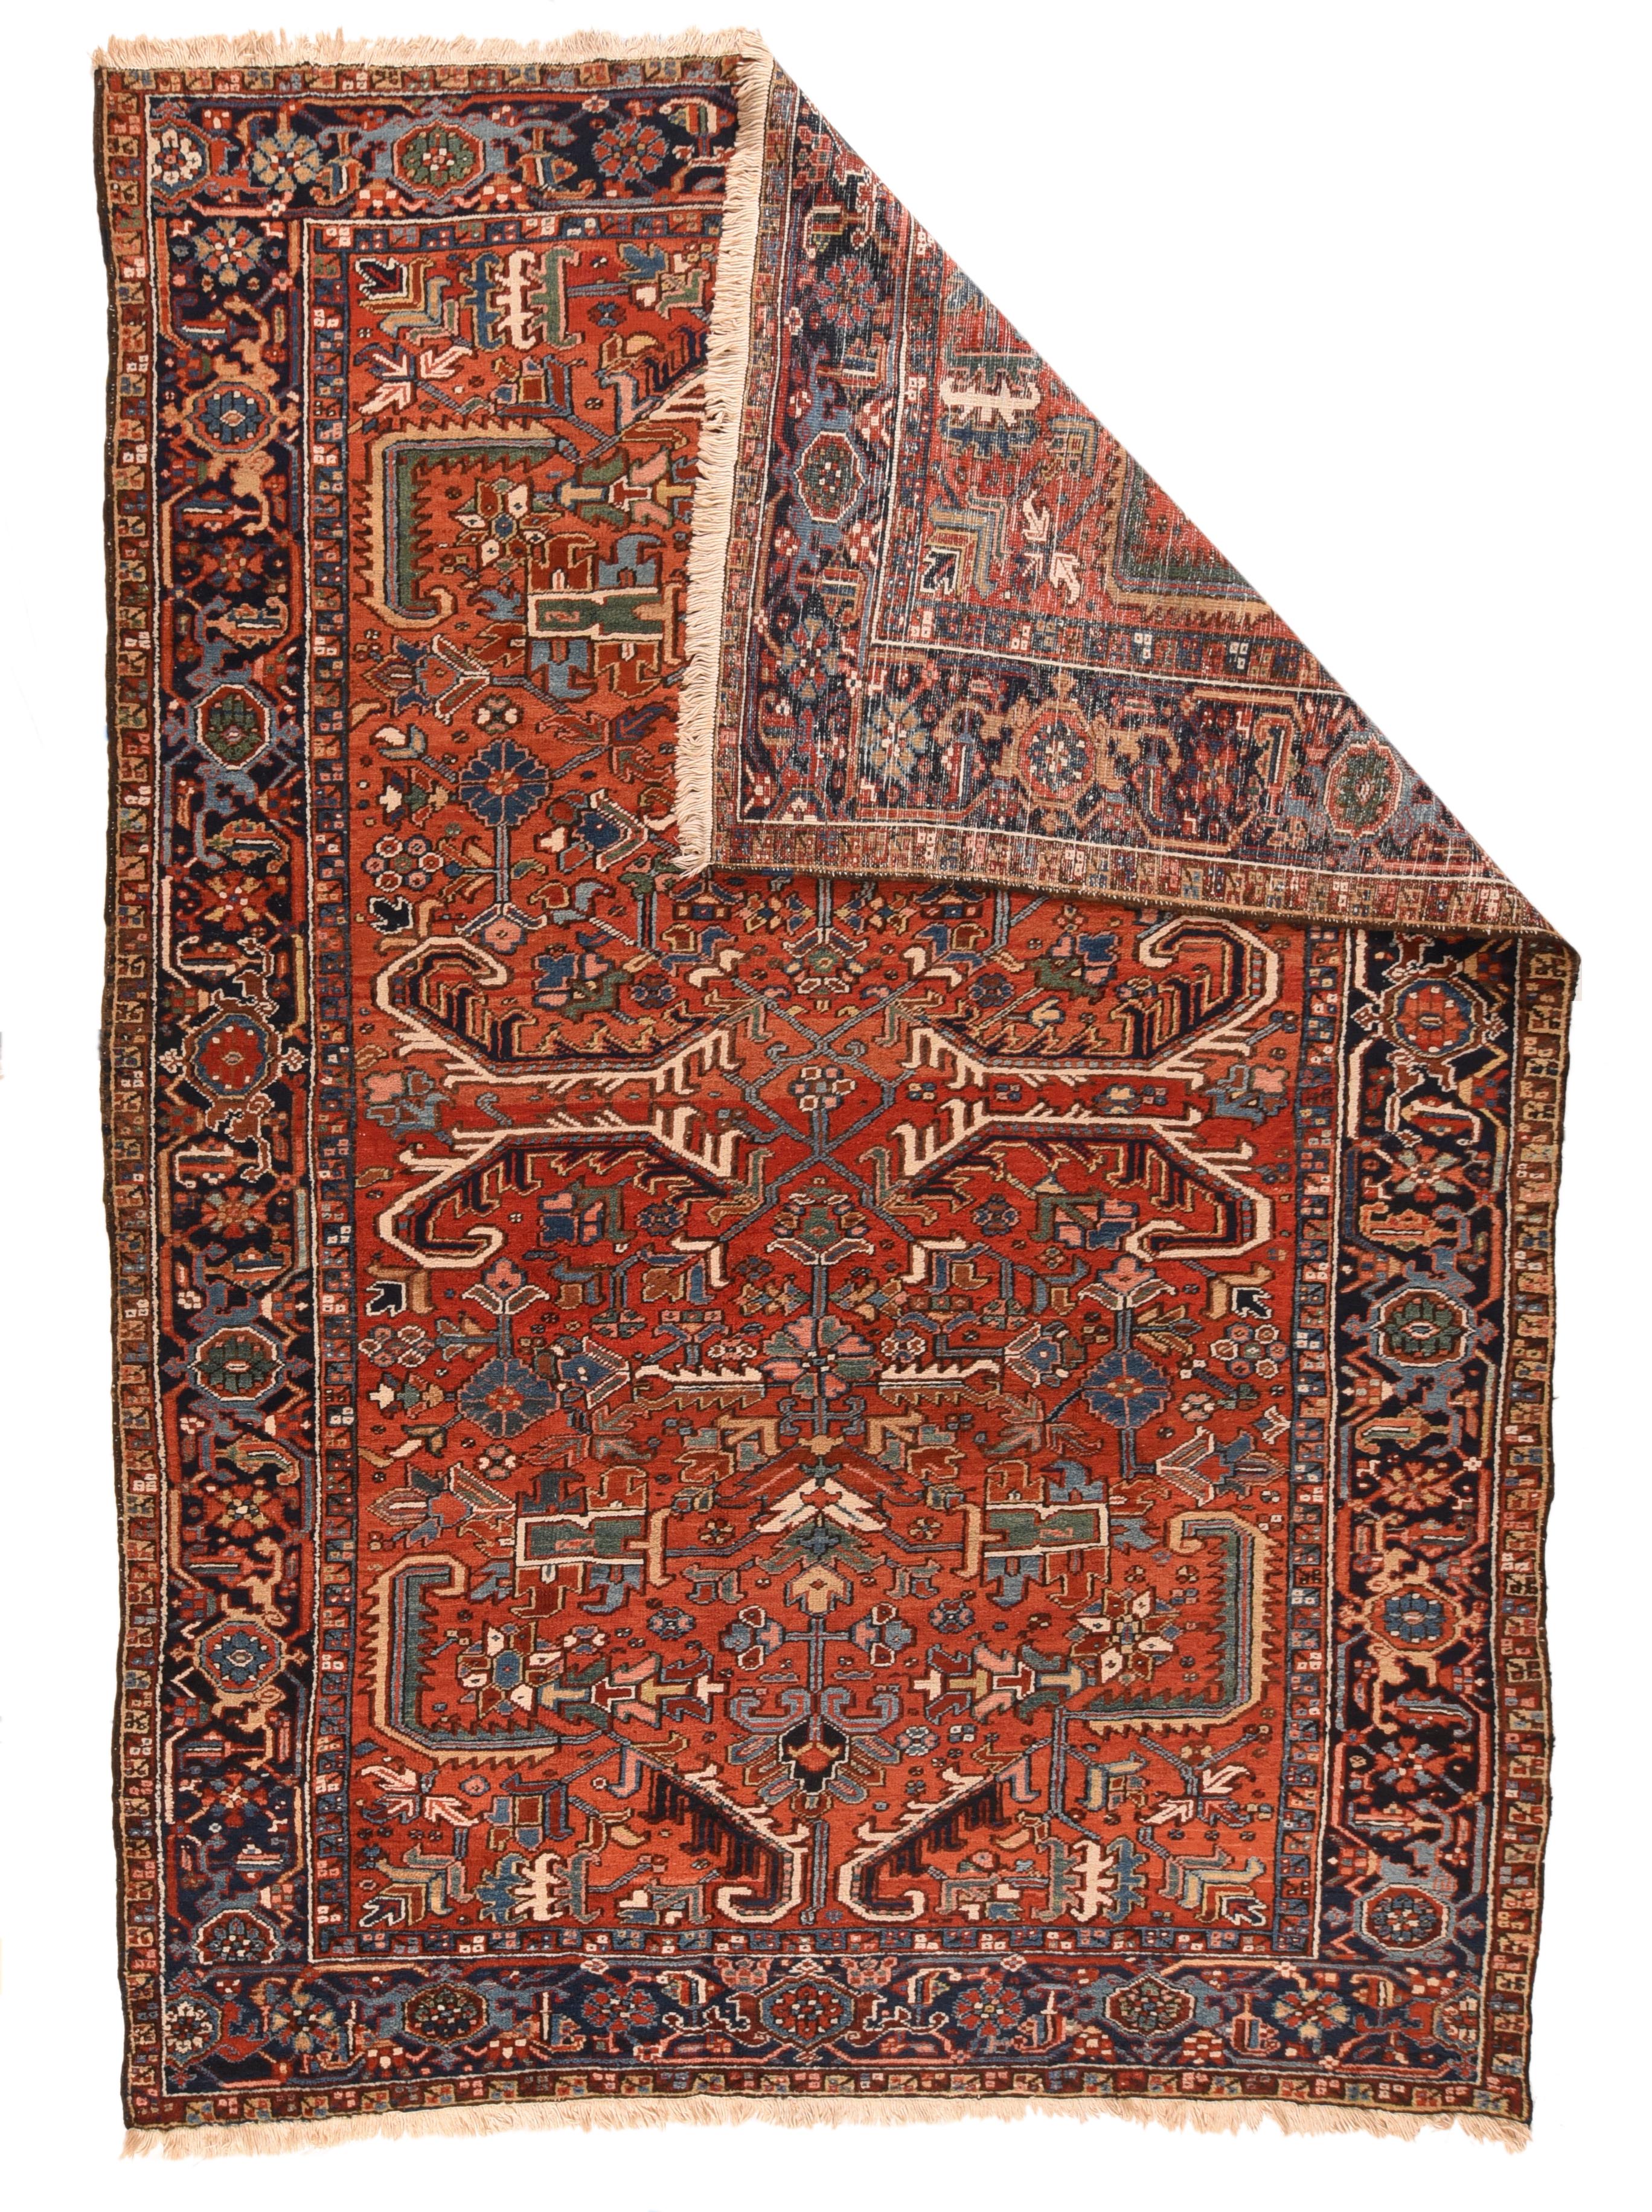 Vintage Heriz rug 7'5'' x 10'3''. Characteristically Mehriban, with a medium-coarse rustic weave on cotton, and pairs of biochromatic semi-geometric curled leaves; two pairs in the centre and a pair at each end of the visibly abrashed warm madder